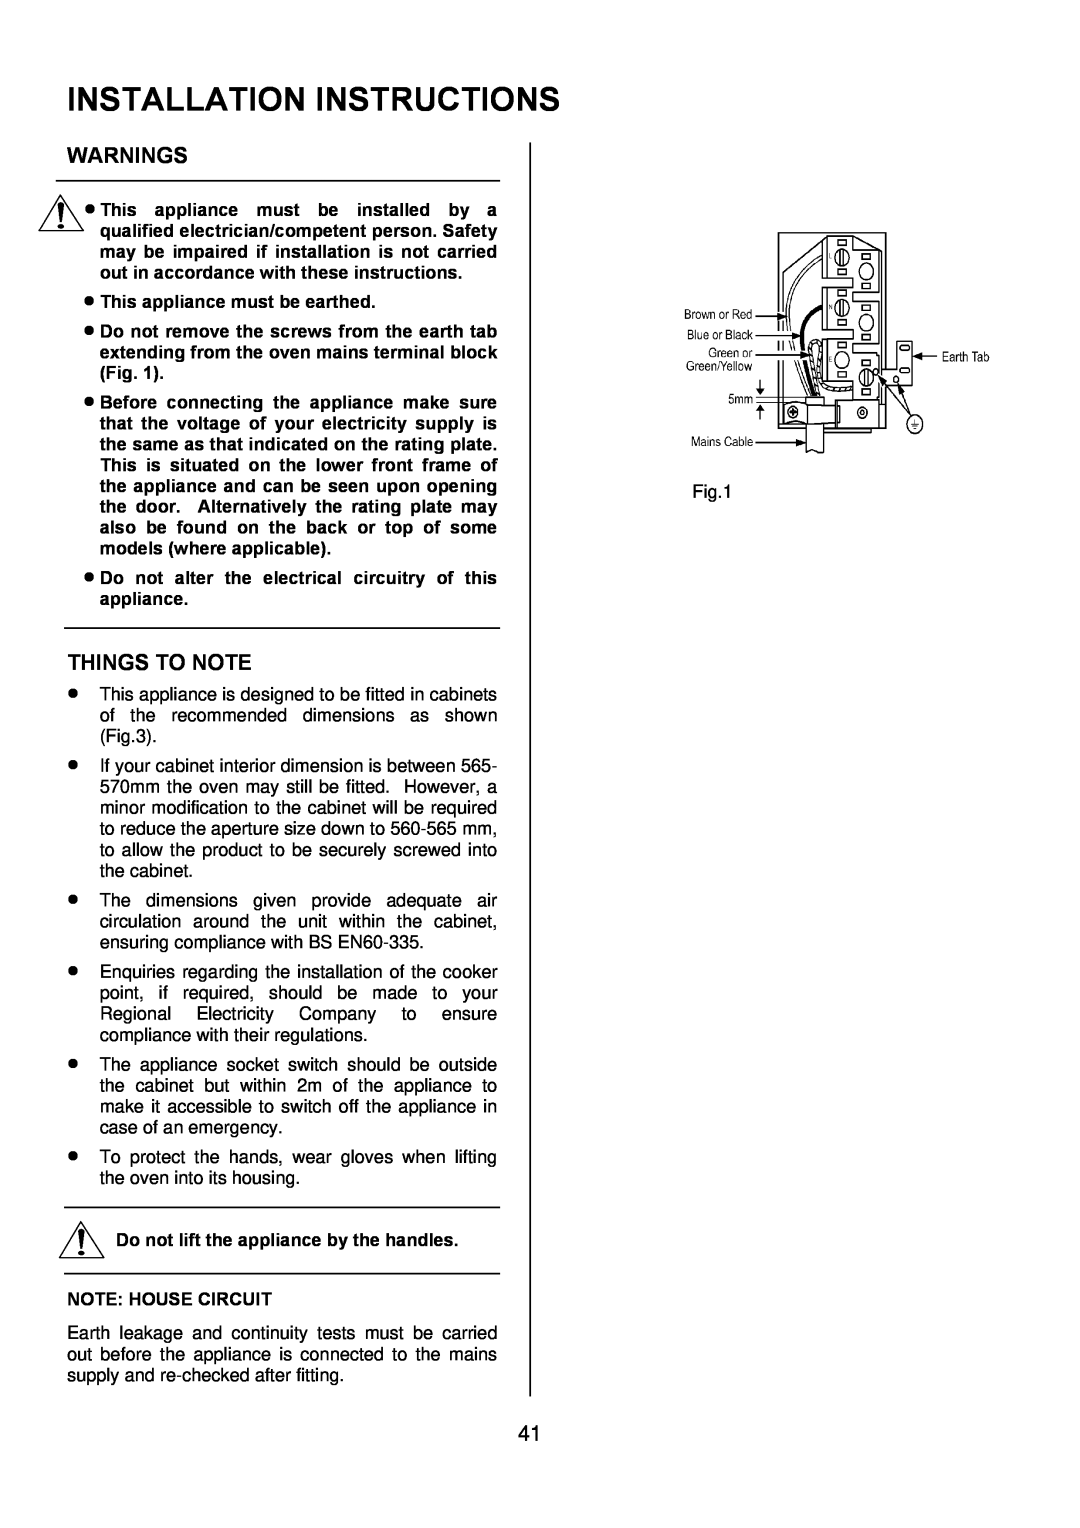 Zanussi ZDQ 995 manual Installation Instructions, Warnings, This appliance must be earthed, Things To Note 